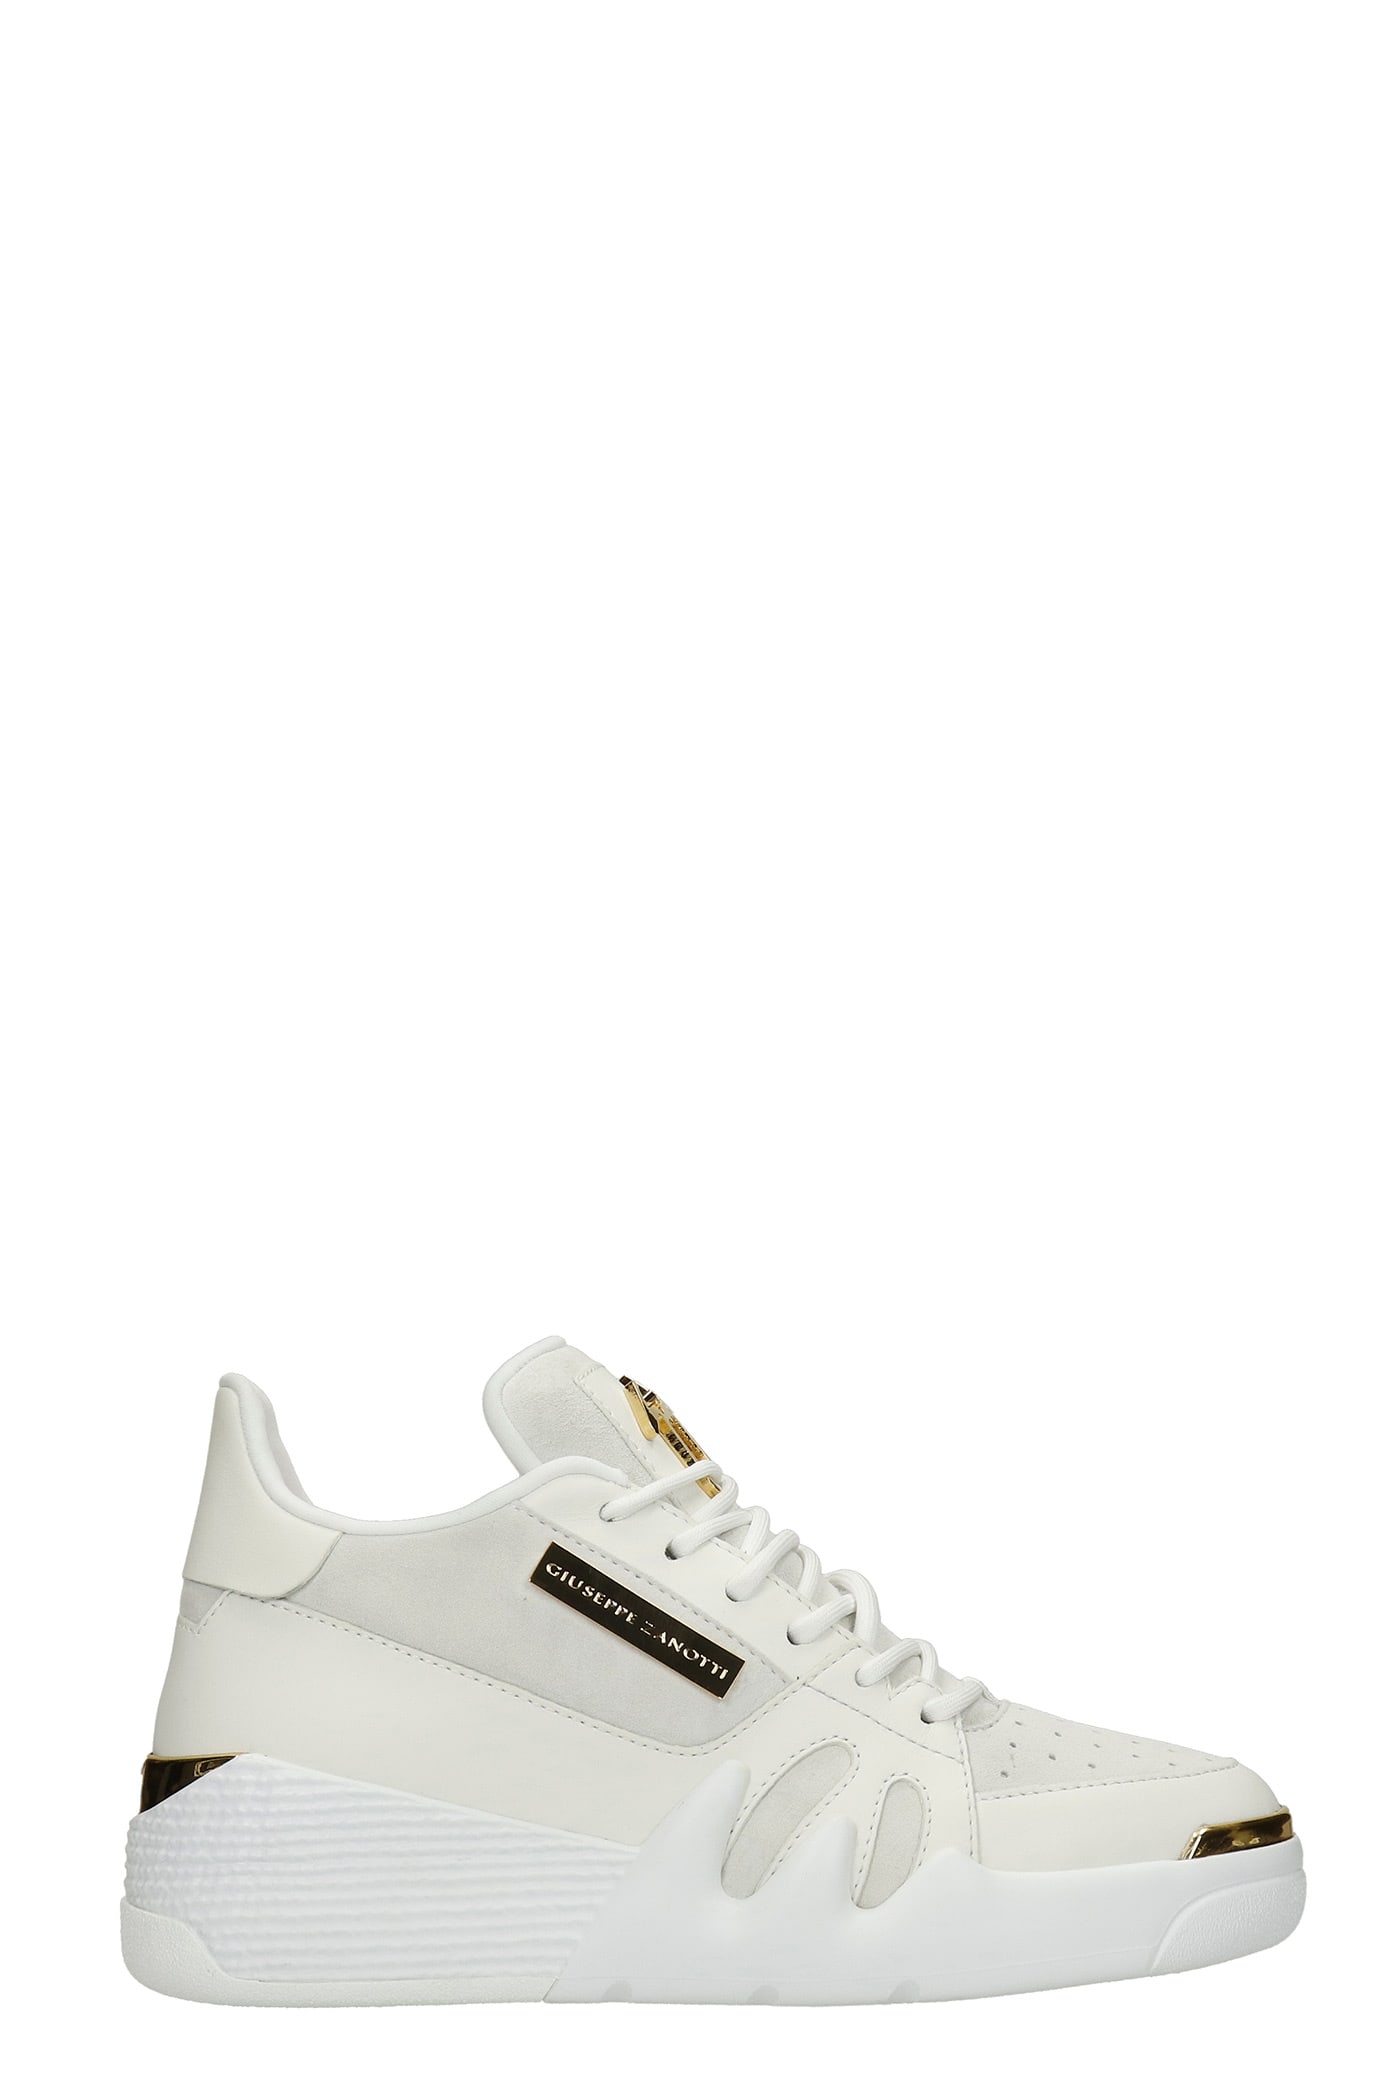 Giuseppe Zanotti Sneakers In White Suede And Leather